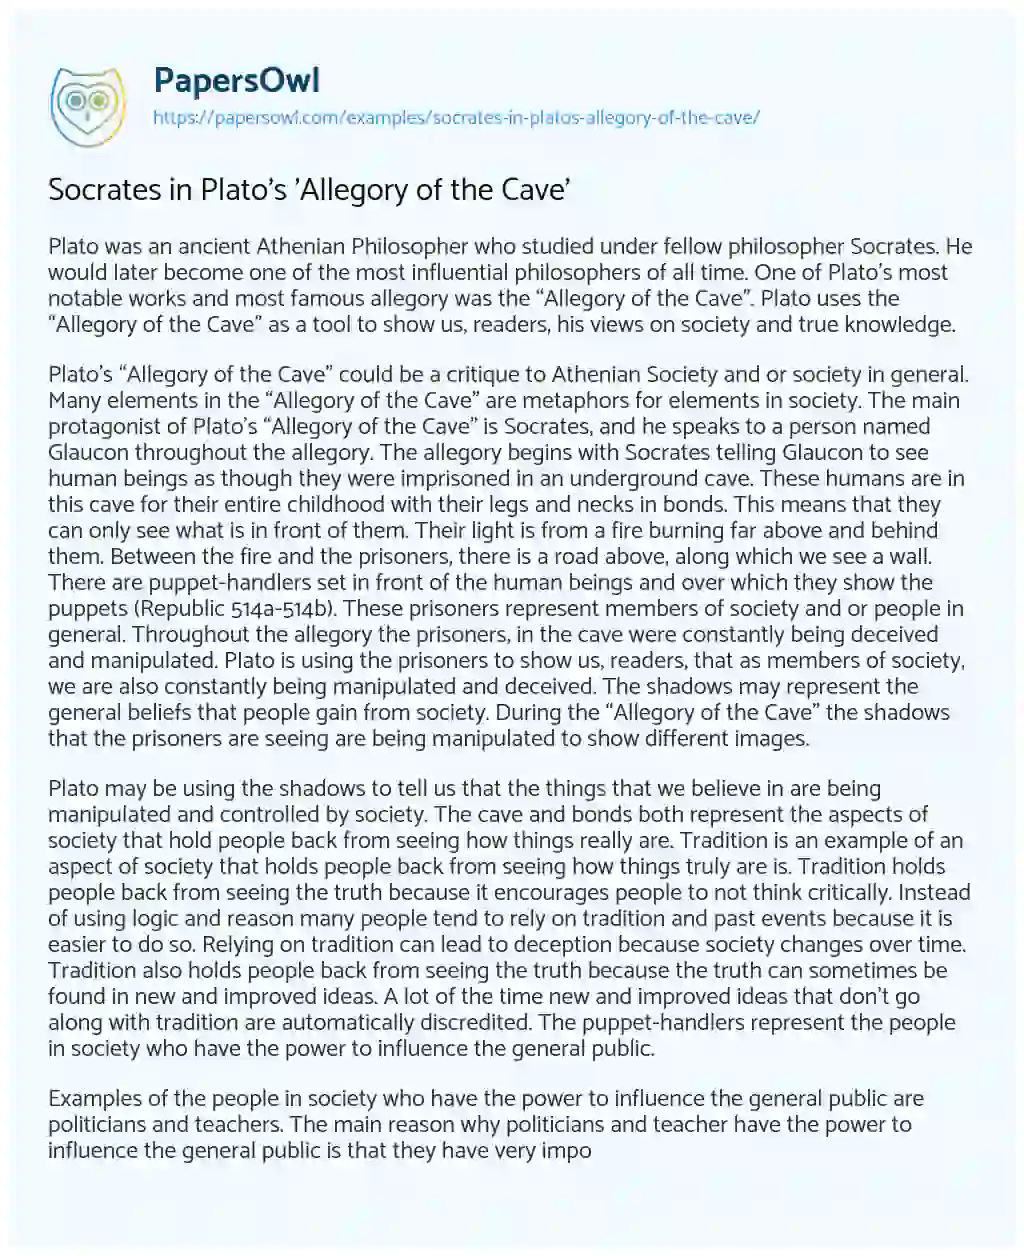 Essay on Socrates in Plato’s ‘Allegory of the Cave’